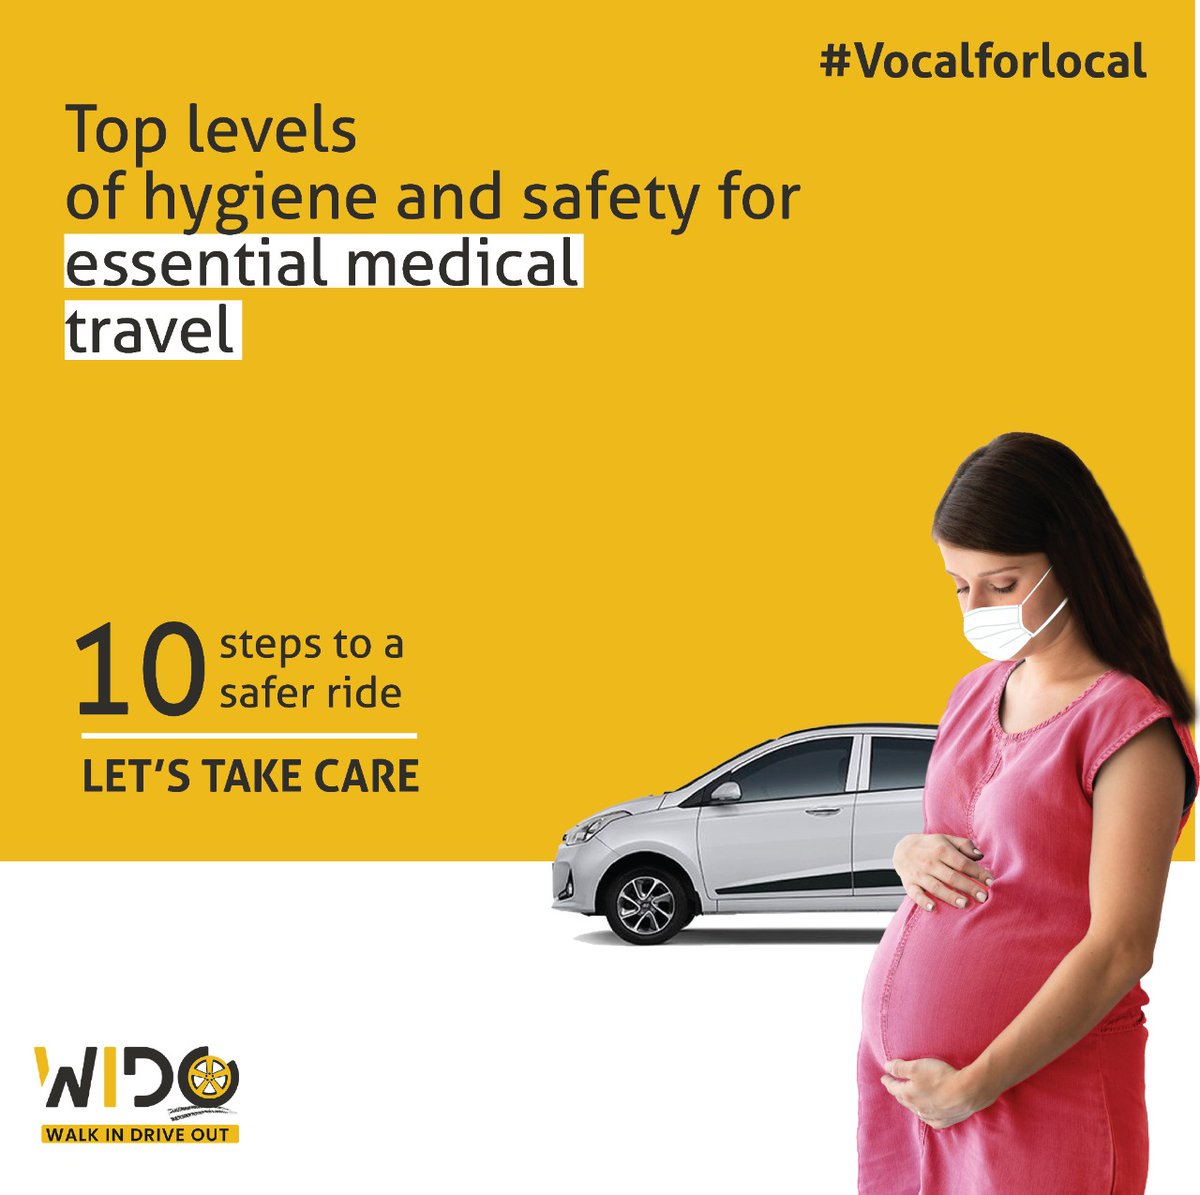 Full hygiene and safety medical travel. Book a WIDO.
Use promo code: FREERIDE
Download our app at play store here 📱: bit.ly/36sqBfZ
apple.co/2CK4Gaj
Visit Our Website widocabs.com
#vizagstartup #Localcabservice #citytaxi #DriveJoyWithWIDO #vizagcabs